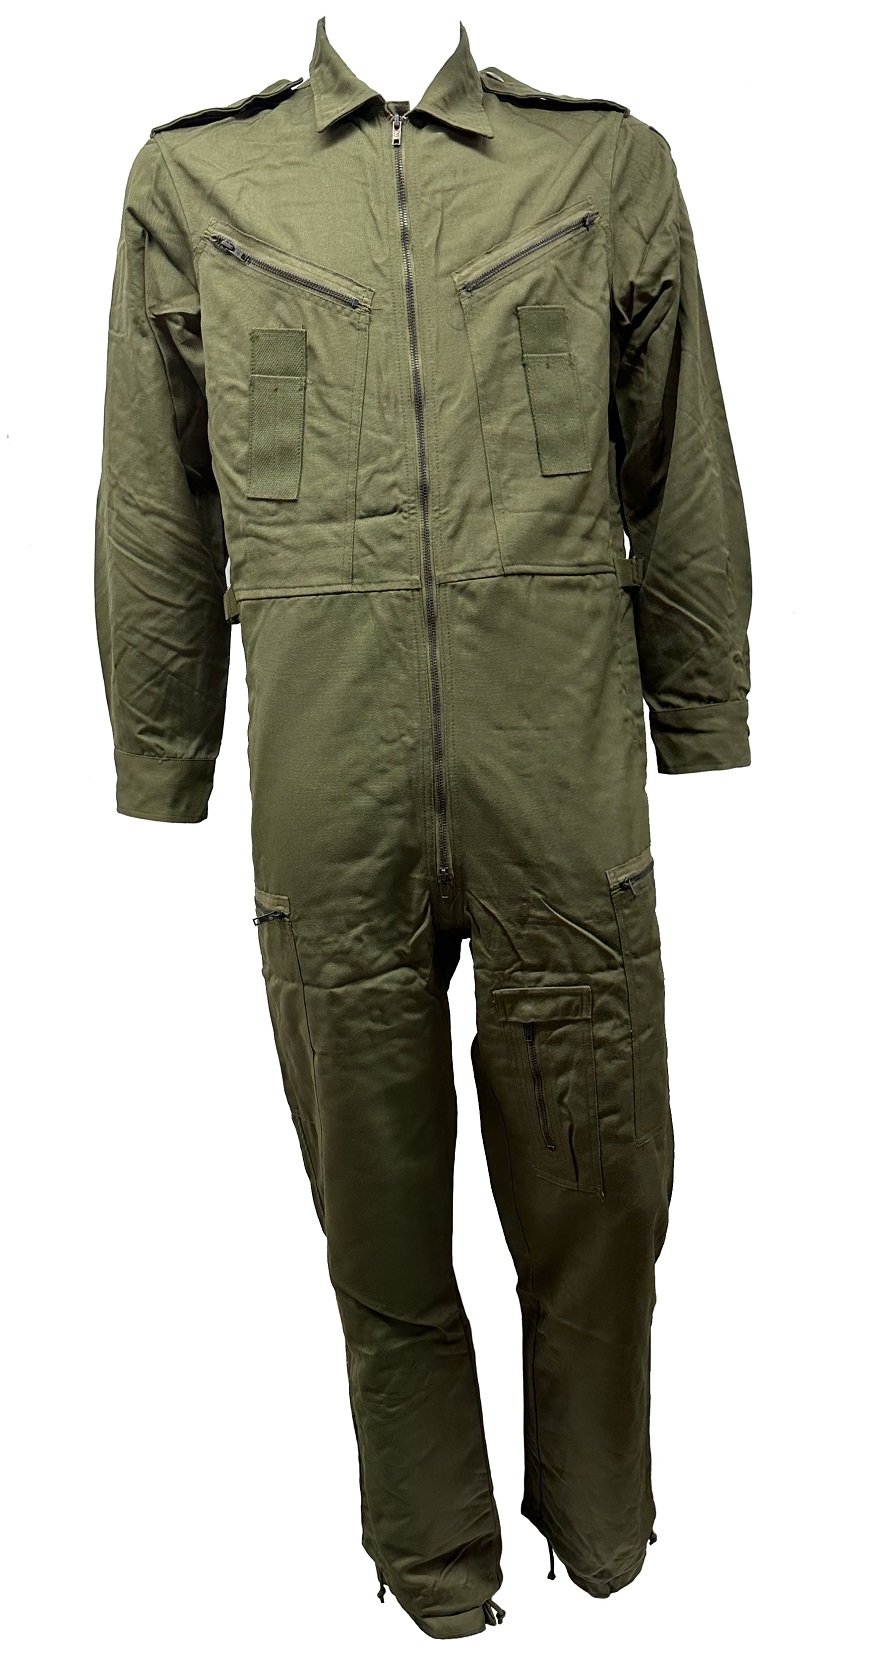 Brand new vehicule crewman coverall